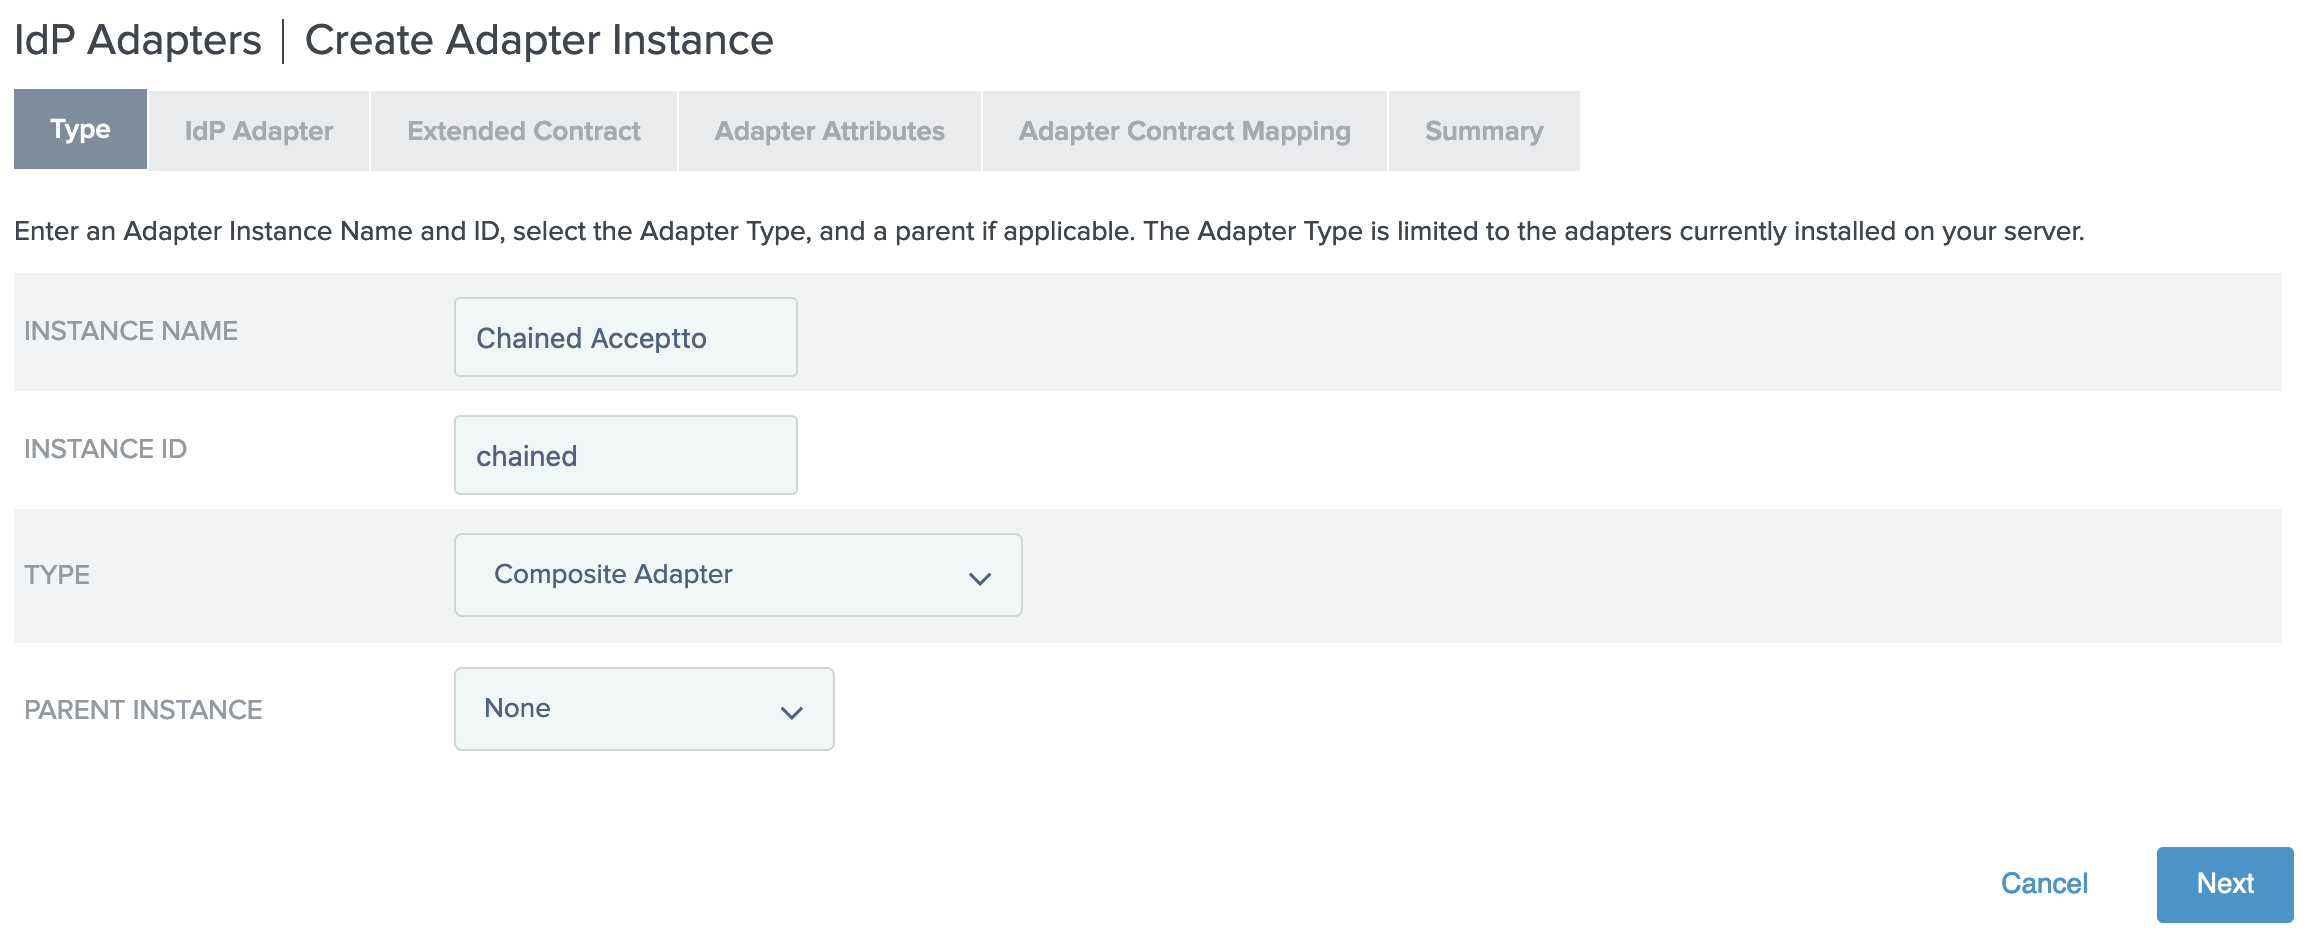 IdP Adapters | Create Adapter Instance - Type